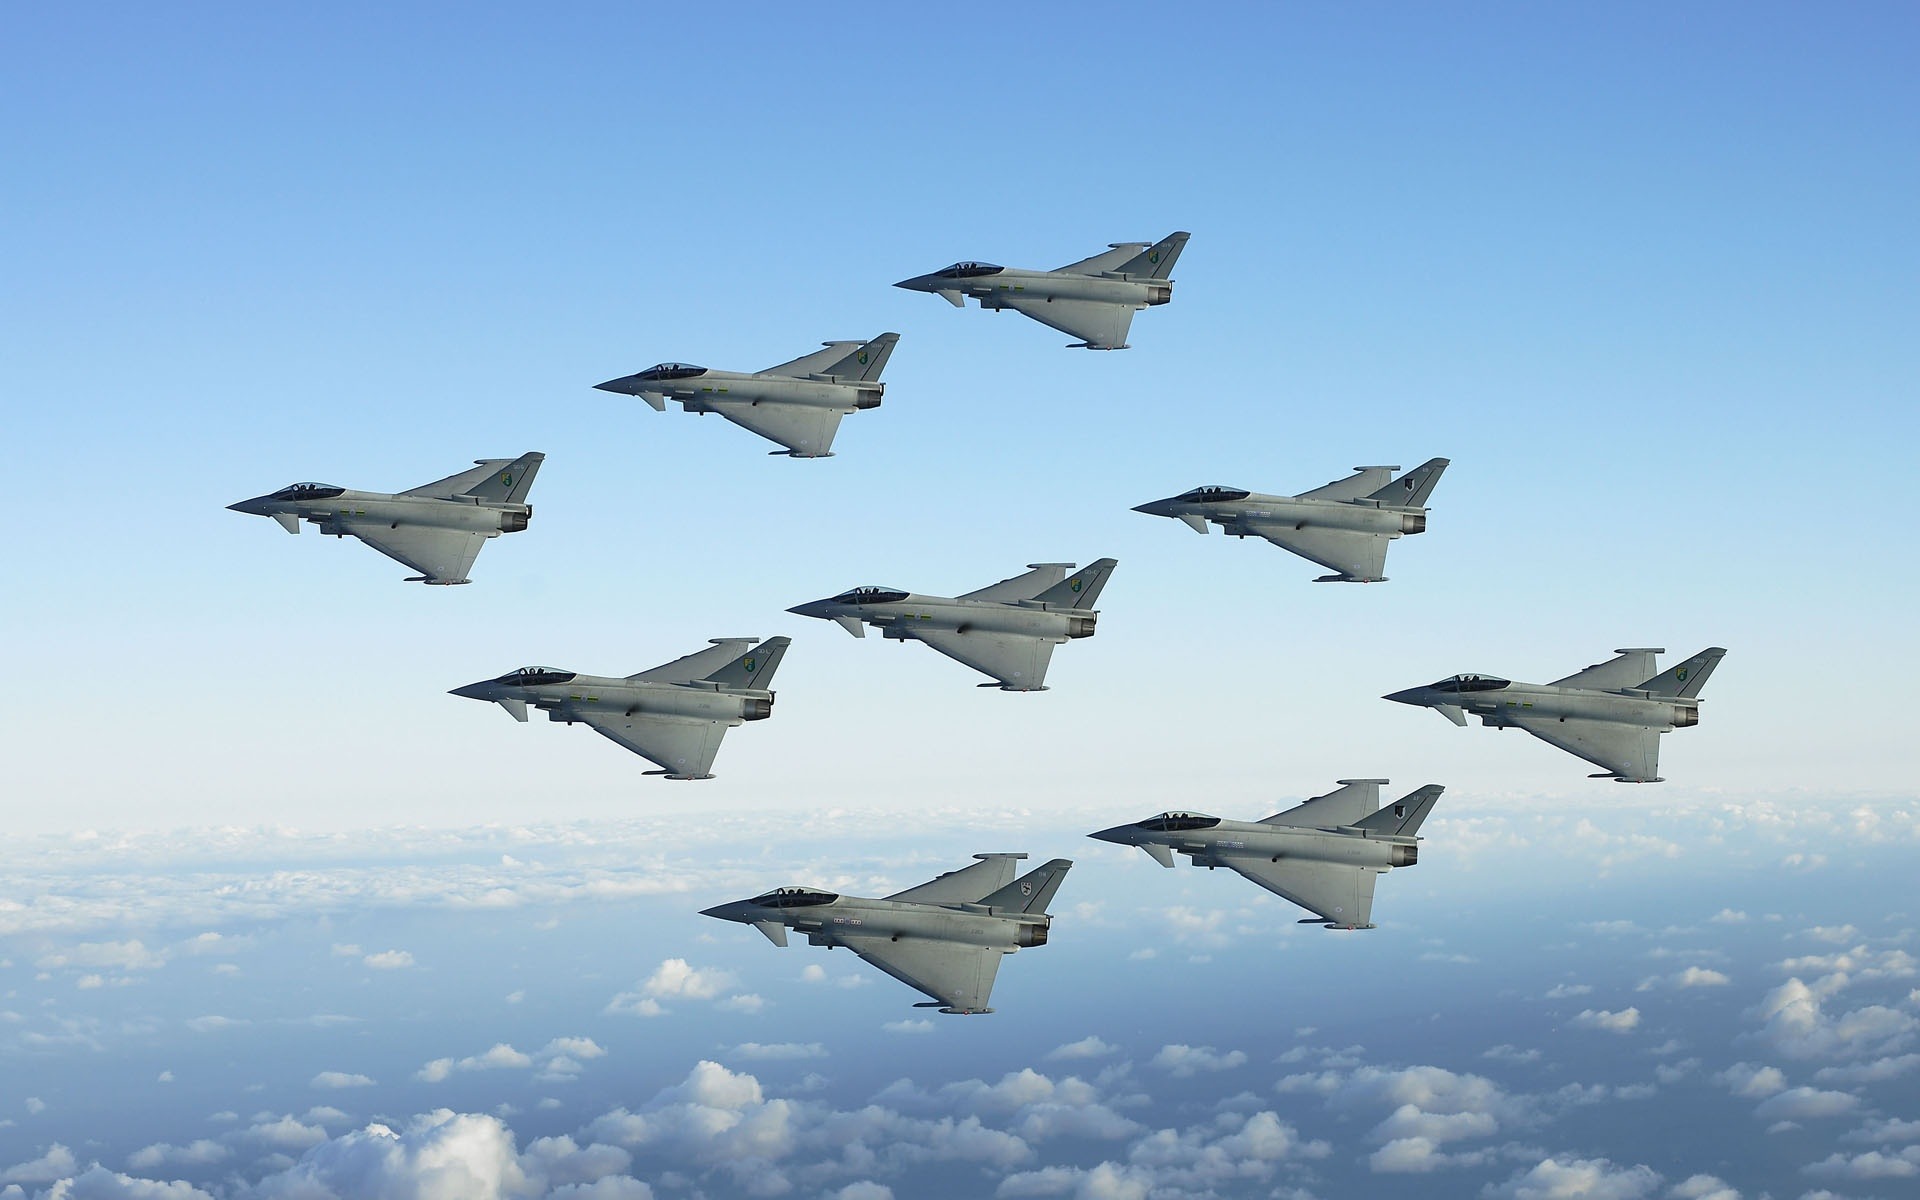 imagescicomimg201304military fighter jets 9641 hd wallpapersjpg